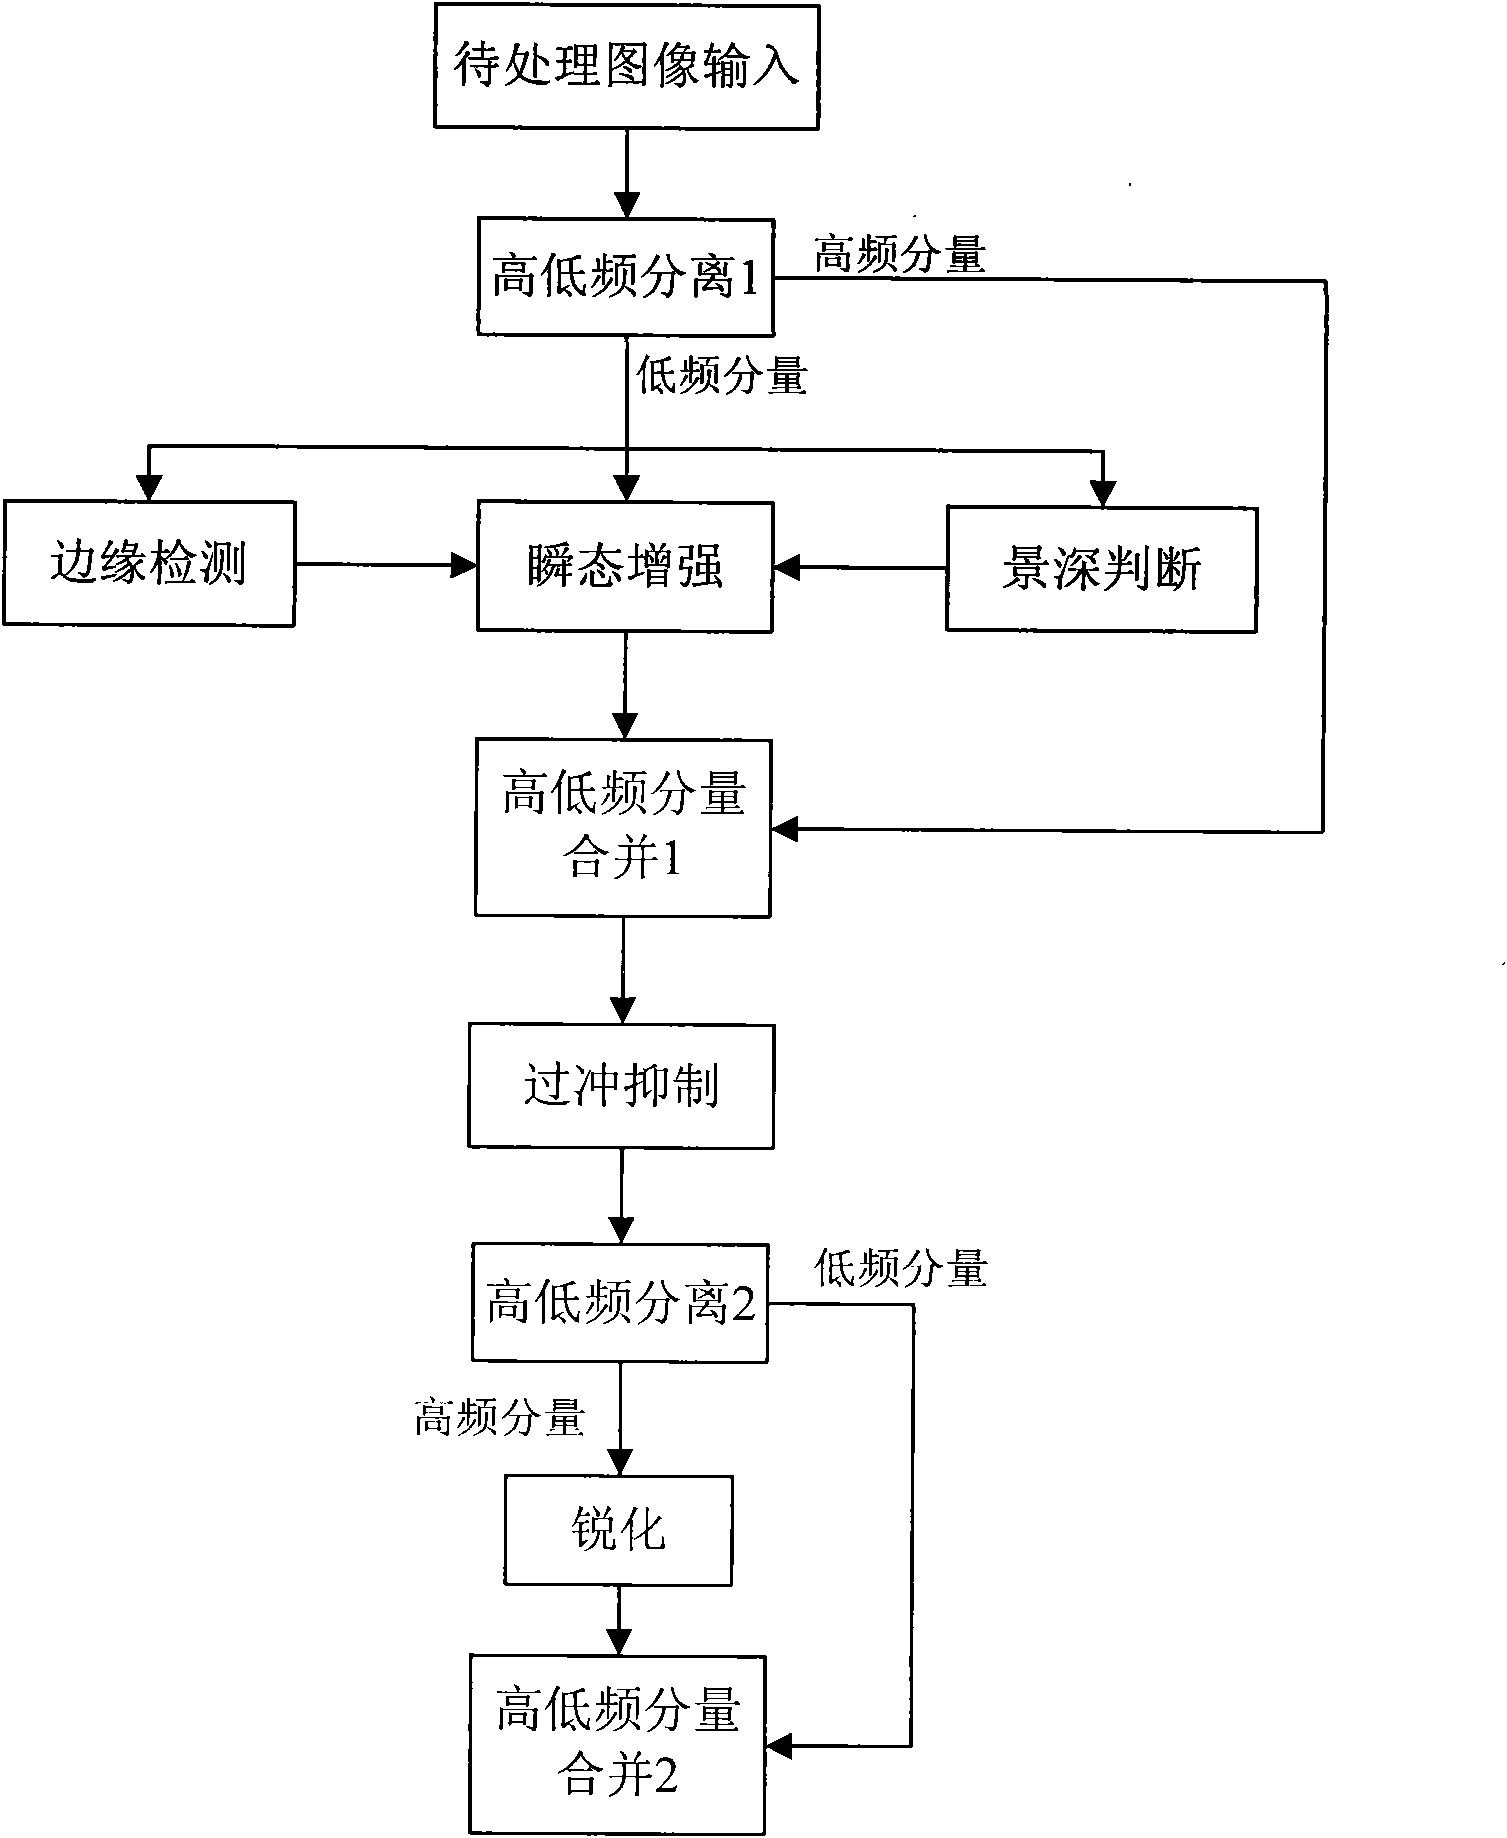 Method and device for enhancing image definition based on zoom factor